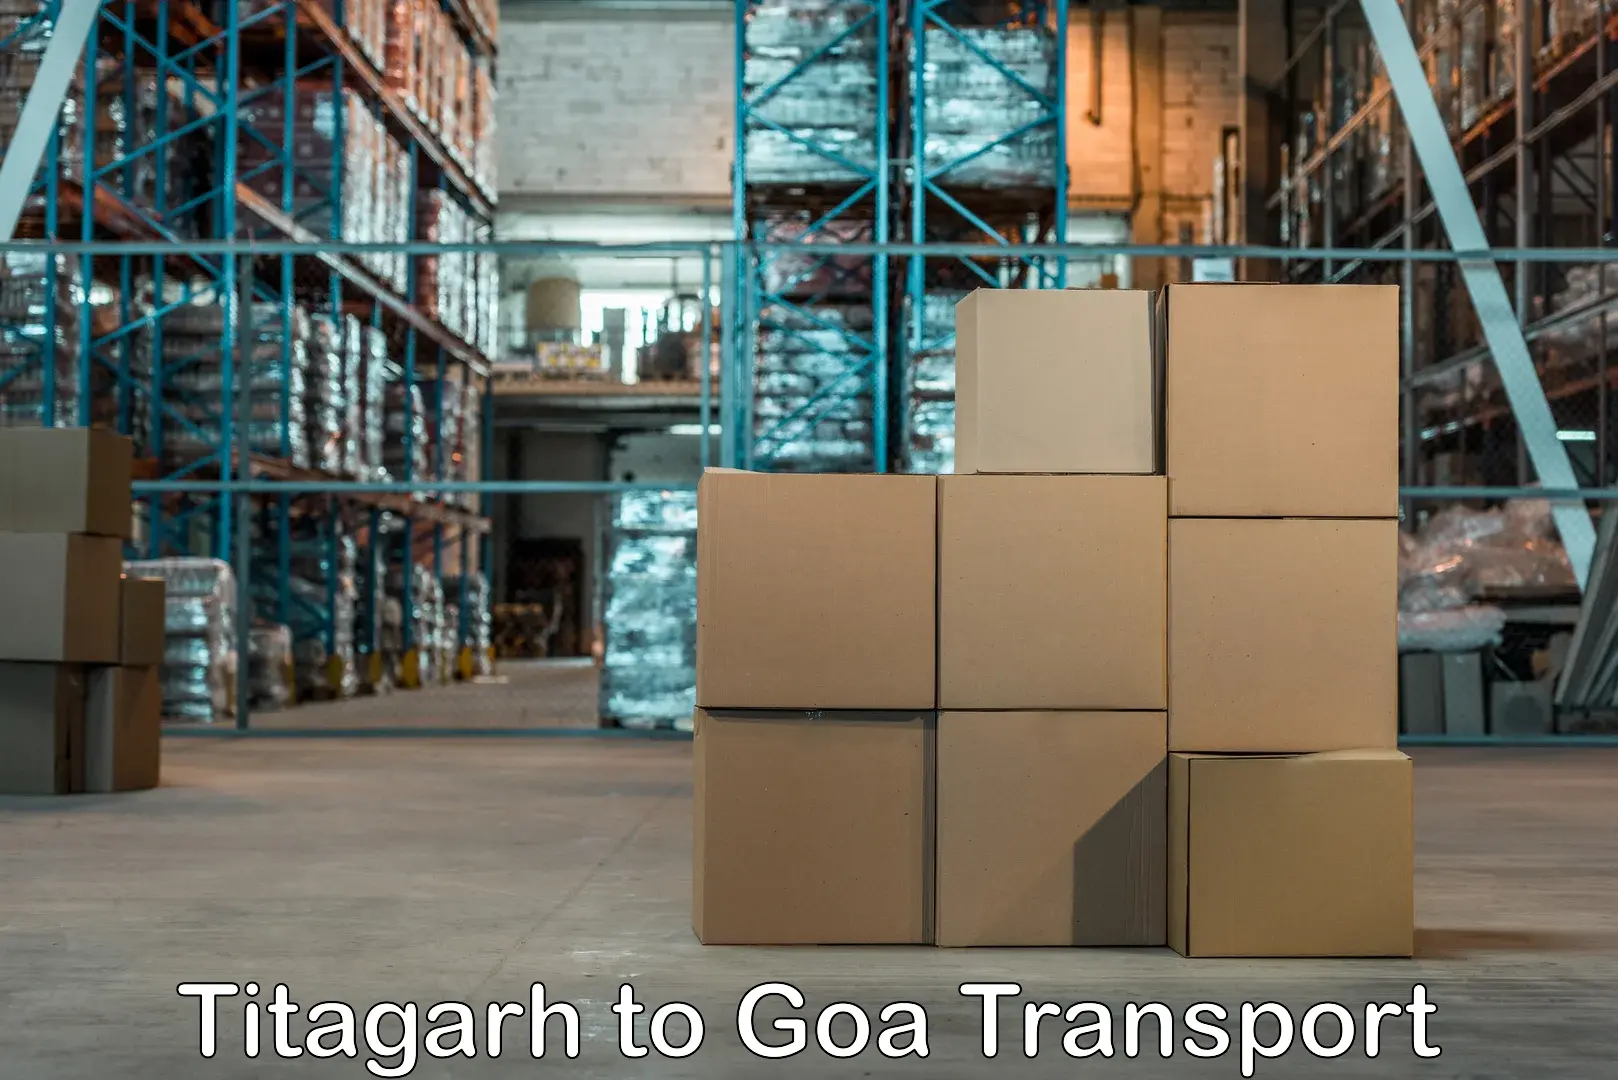 Transport in sharing in Titagarh to Goa